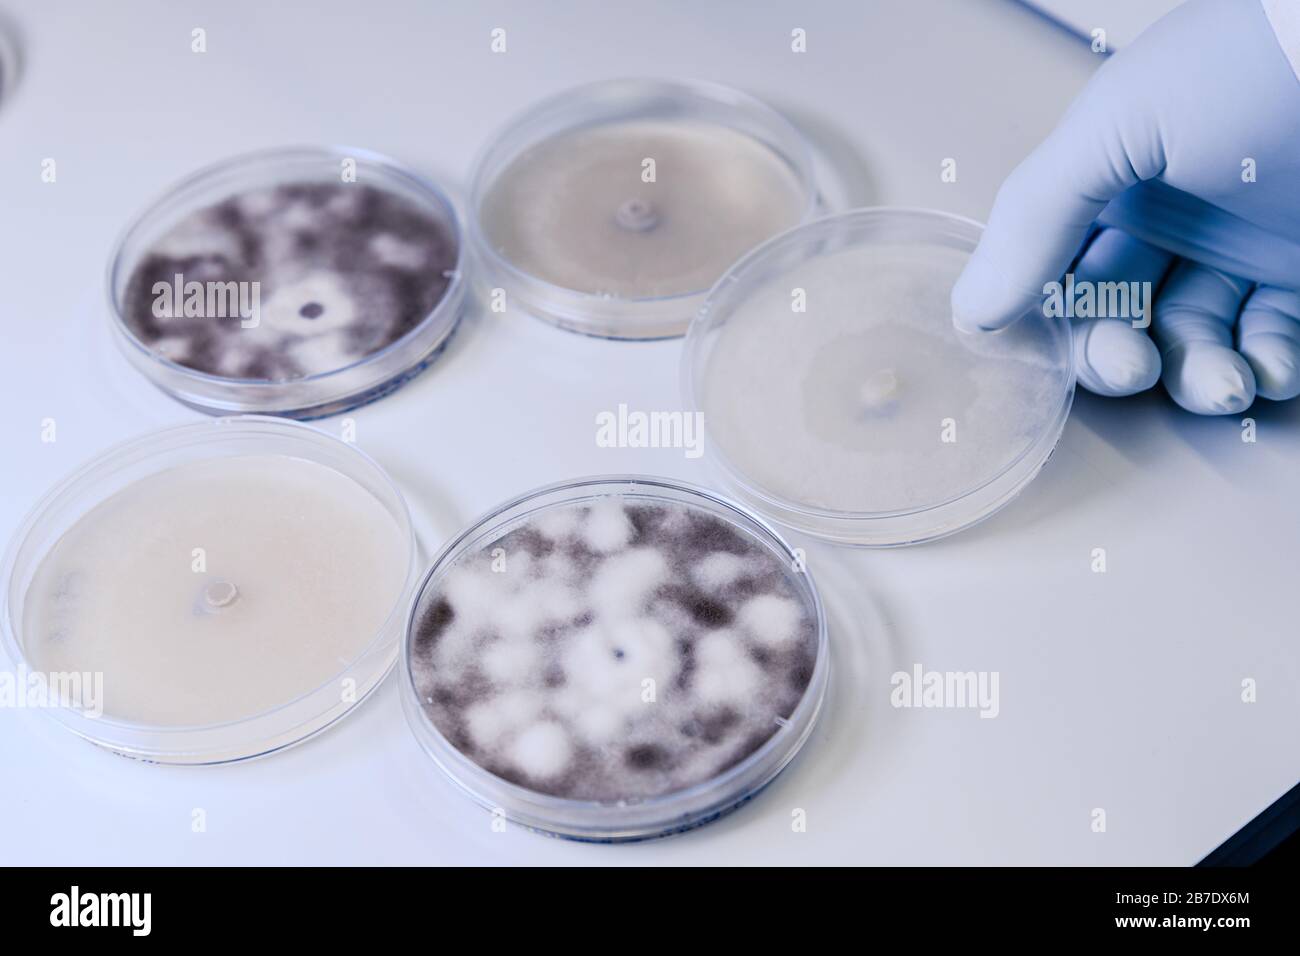 Scientific handling Microbiological cultures in a petri dish for pharmaceutical bioscience research. Concept of science, laboratory and study of disea Stock Photo